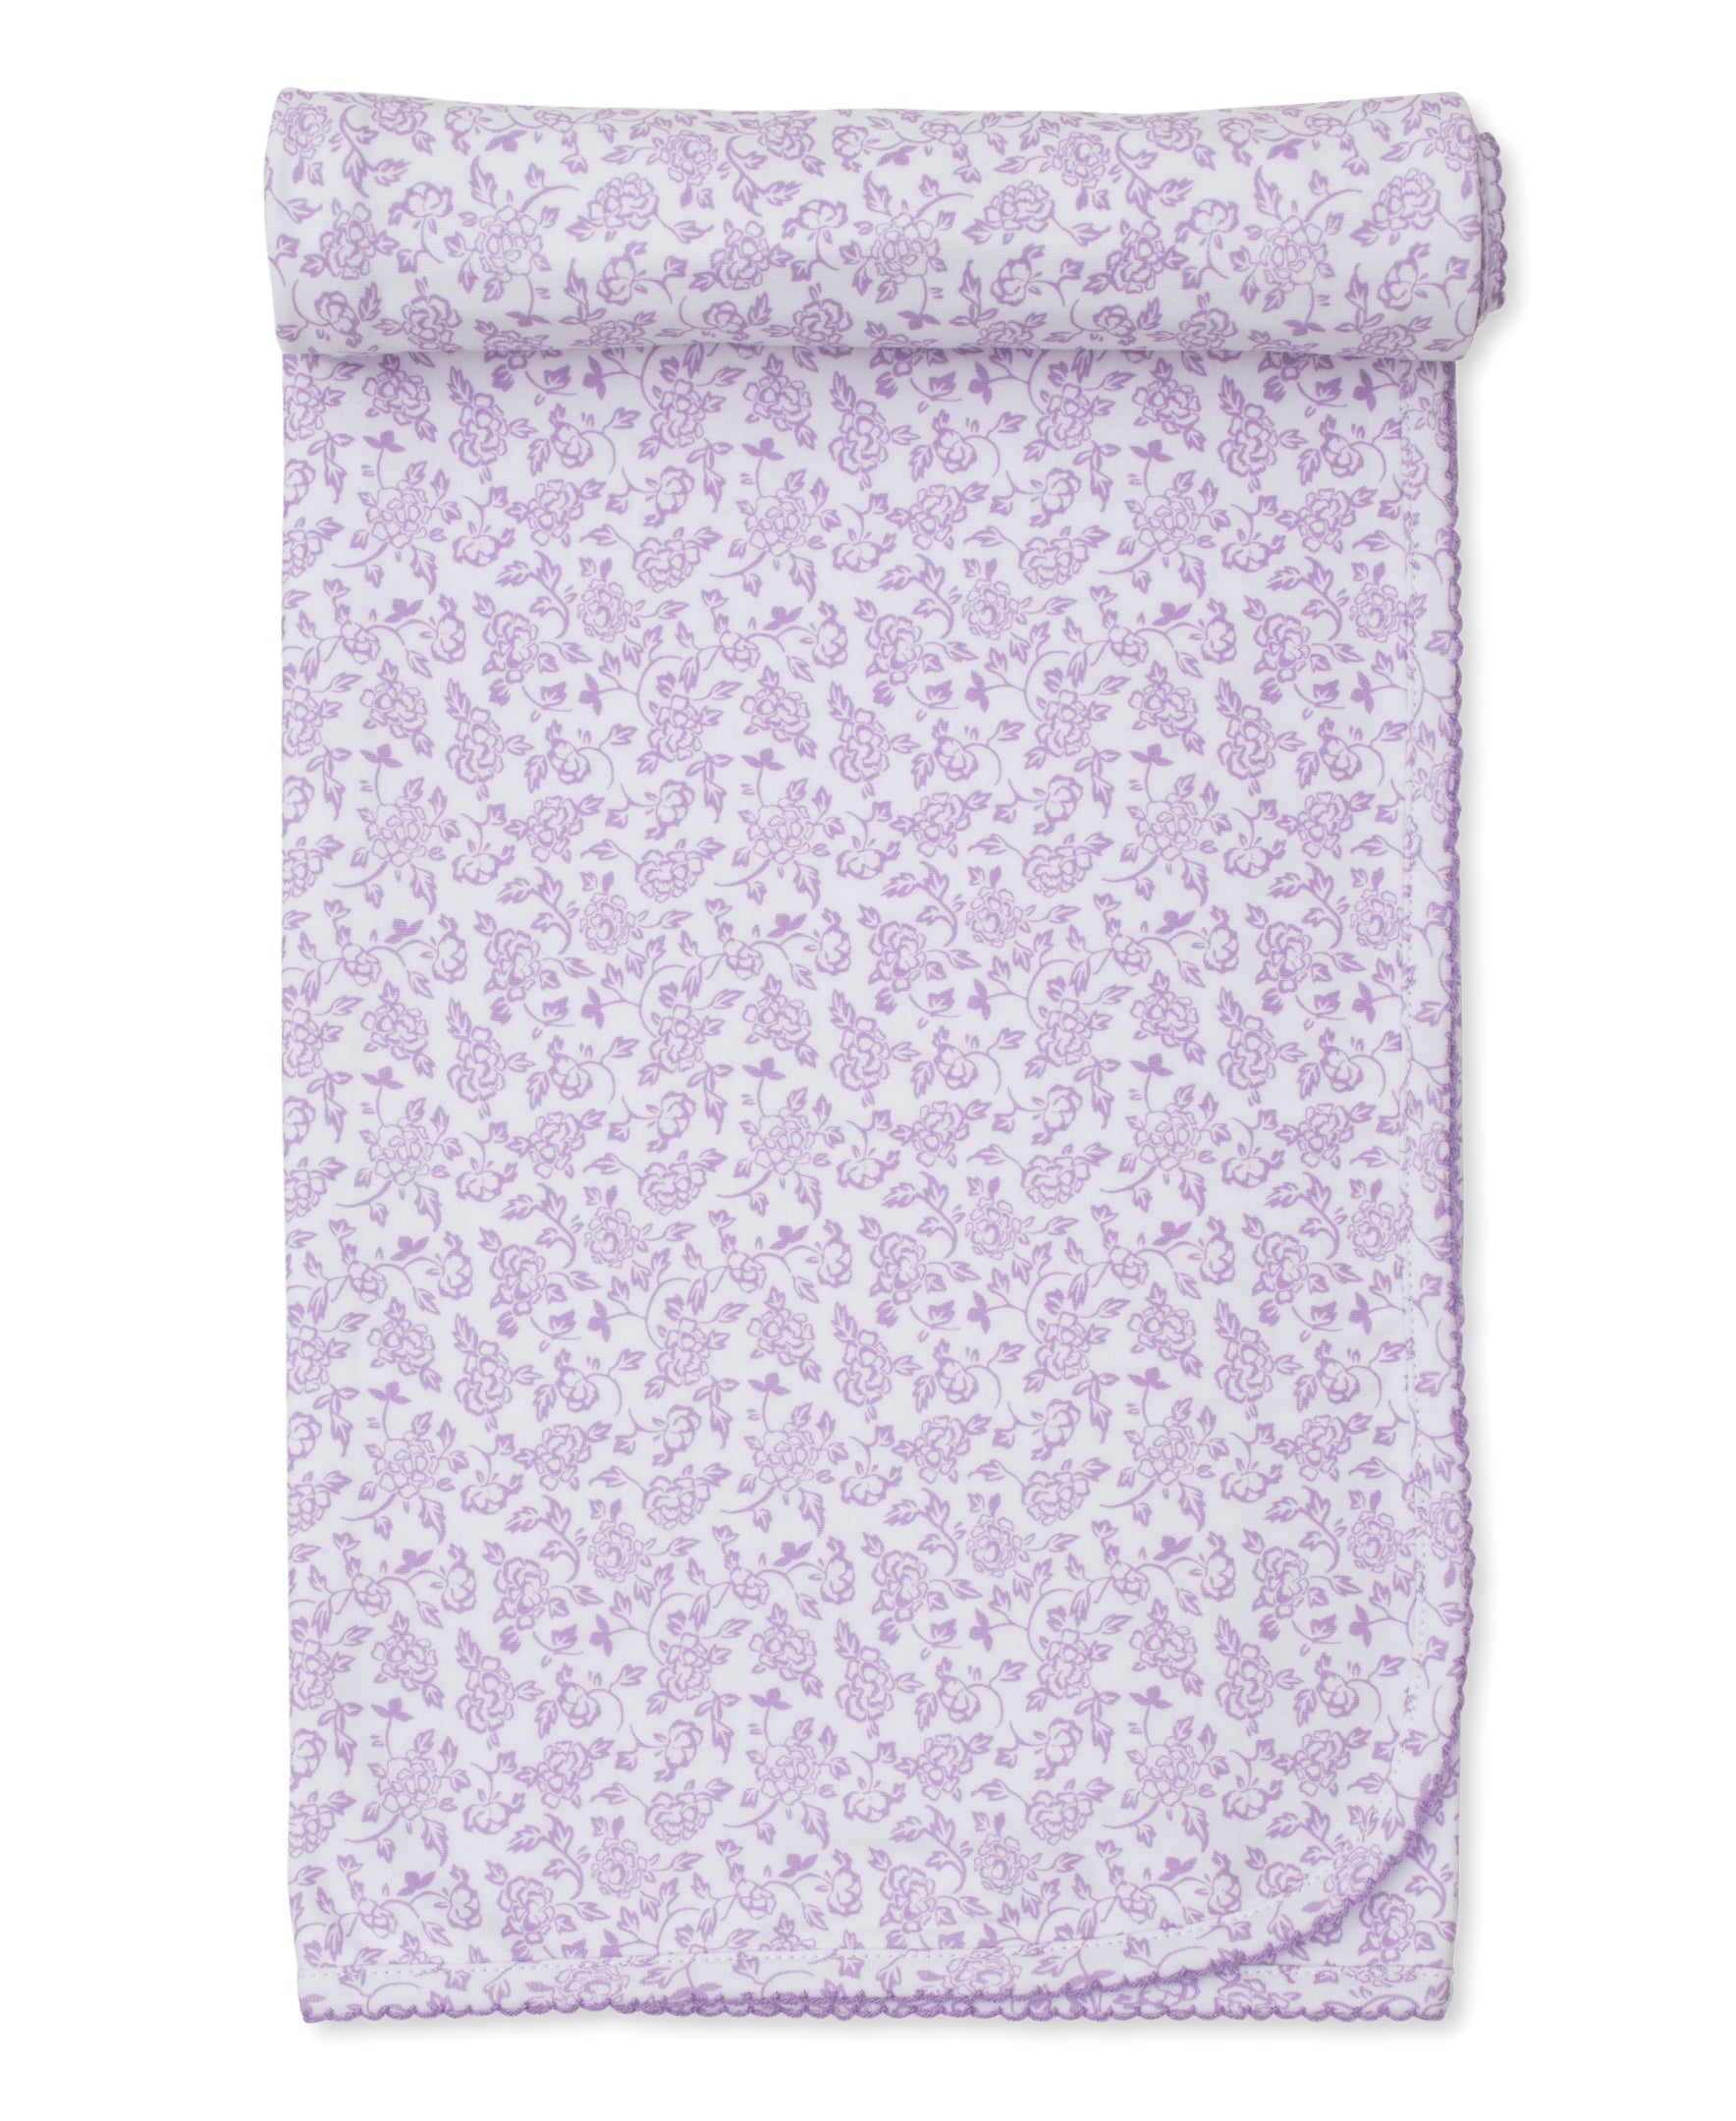 Blossoming Vines Lilac Baby Blanket